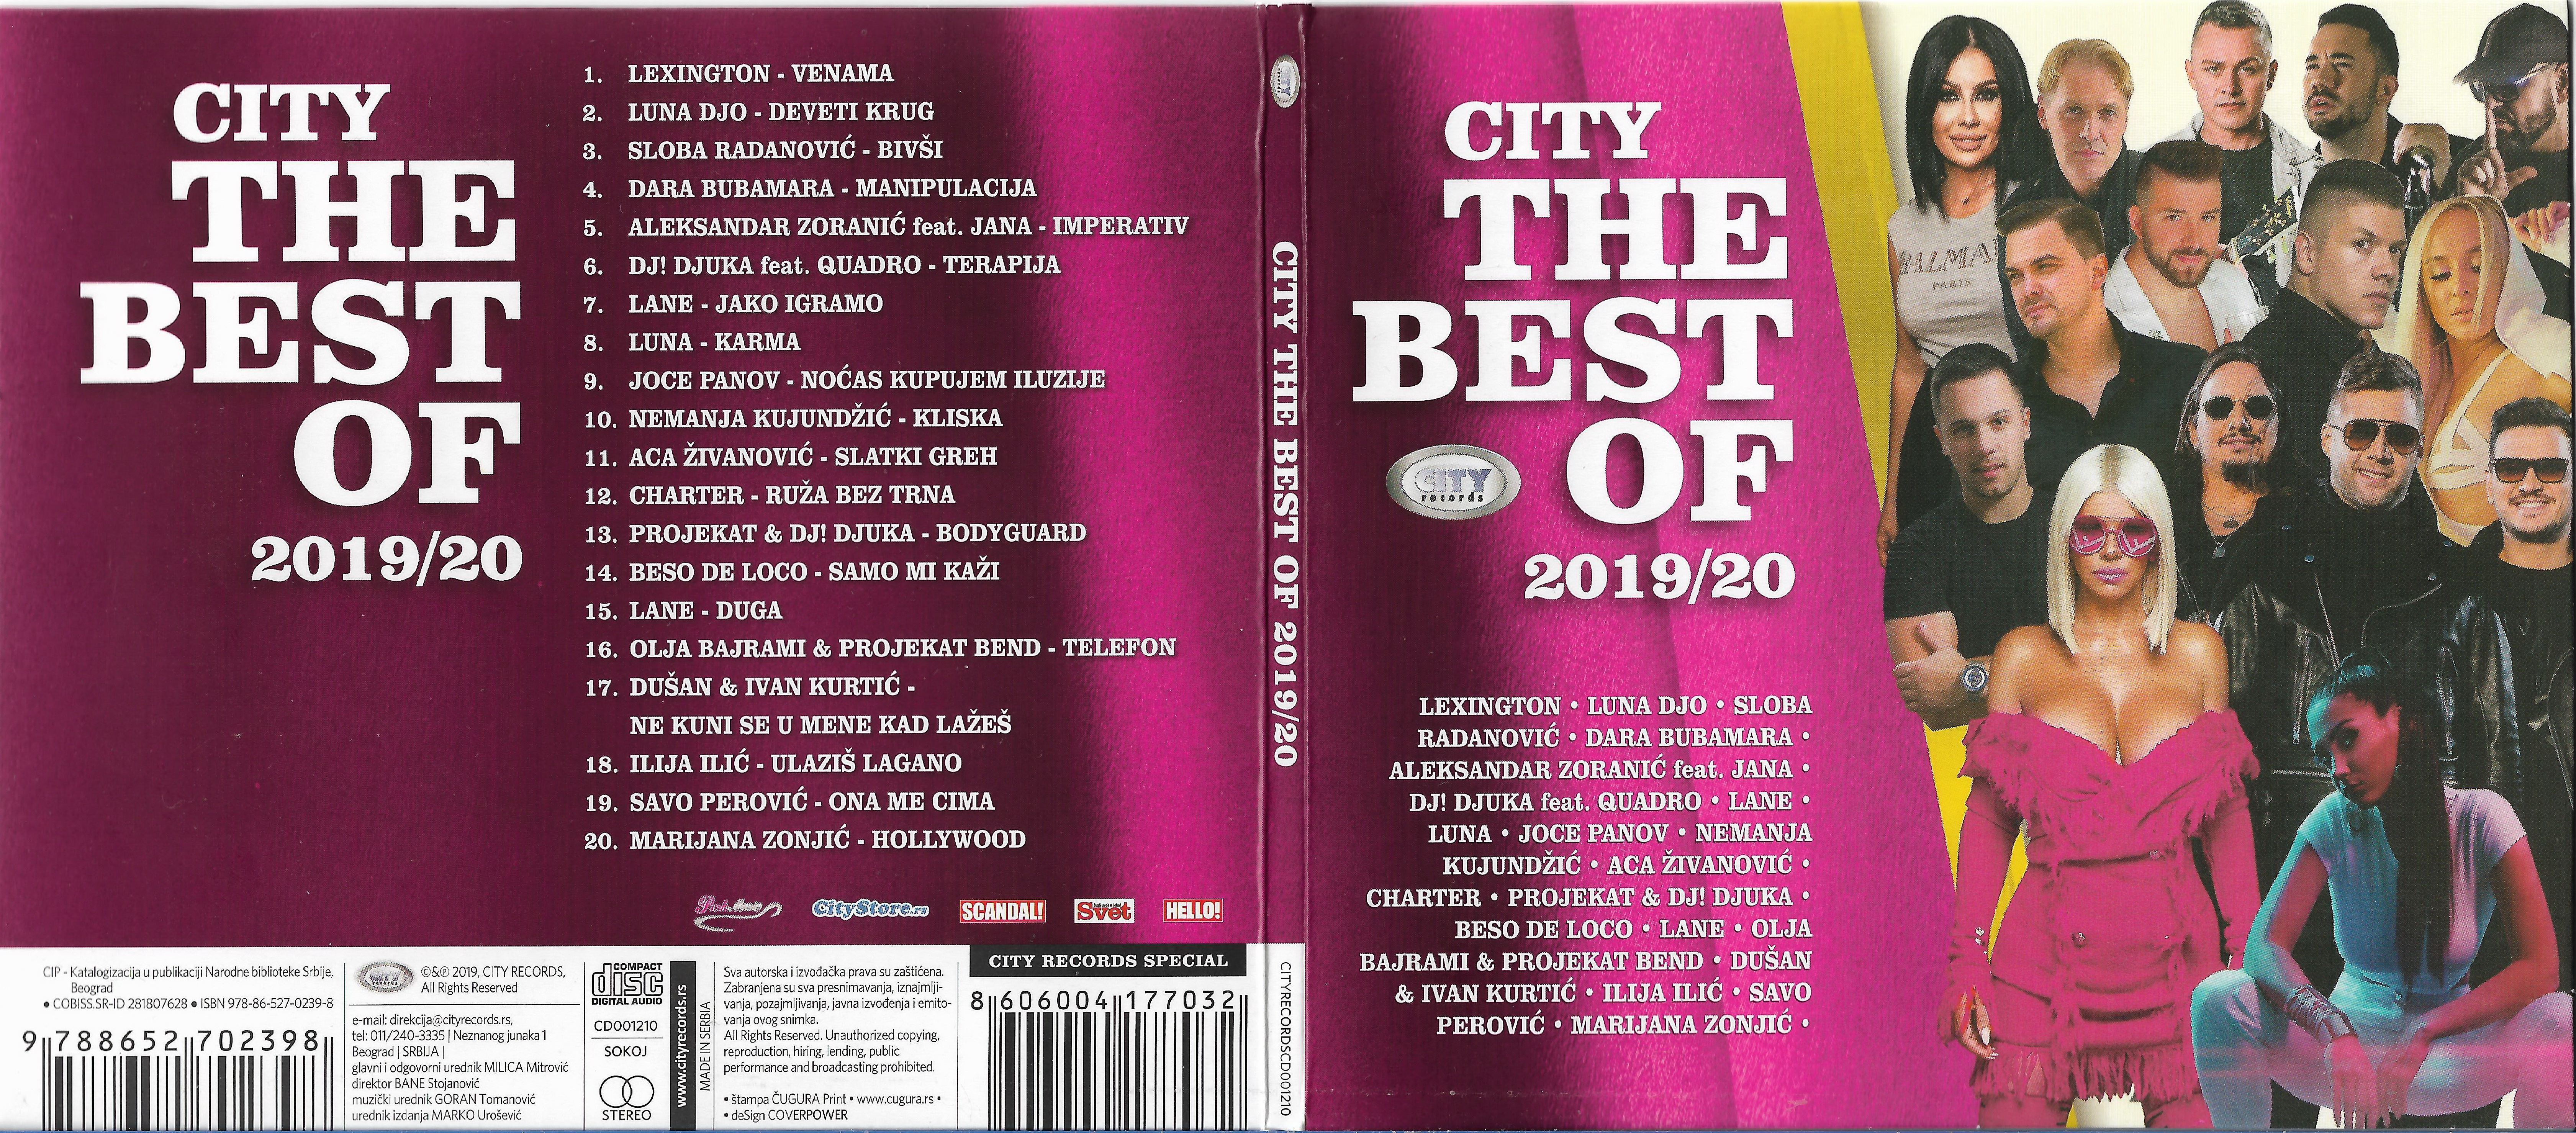 City The Best Of 201920 1